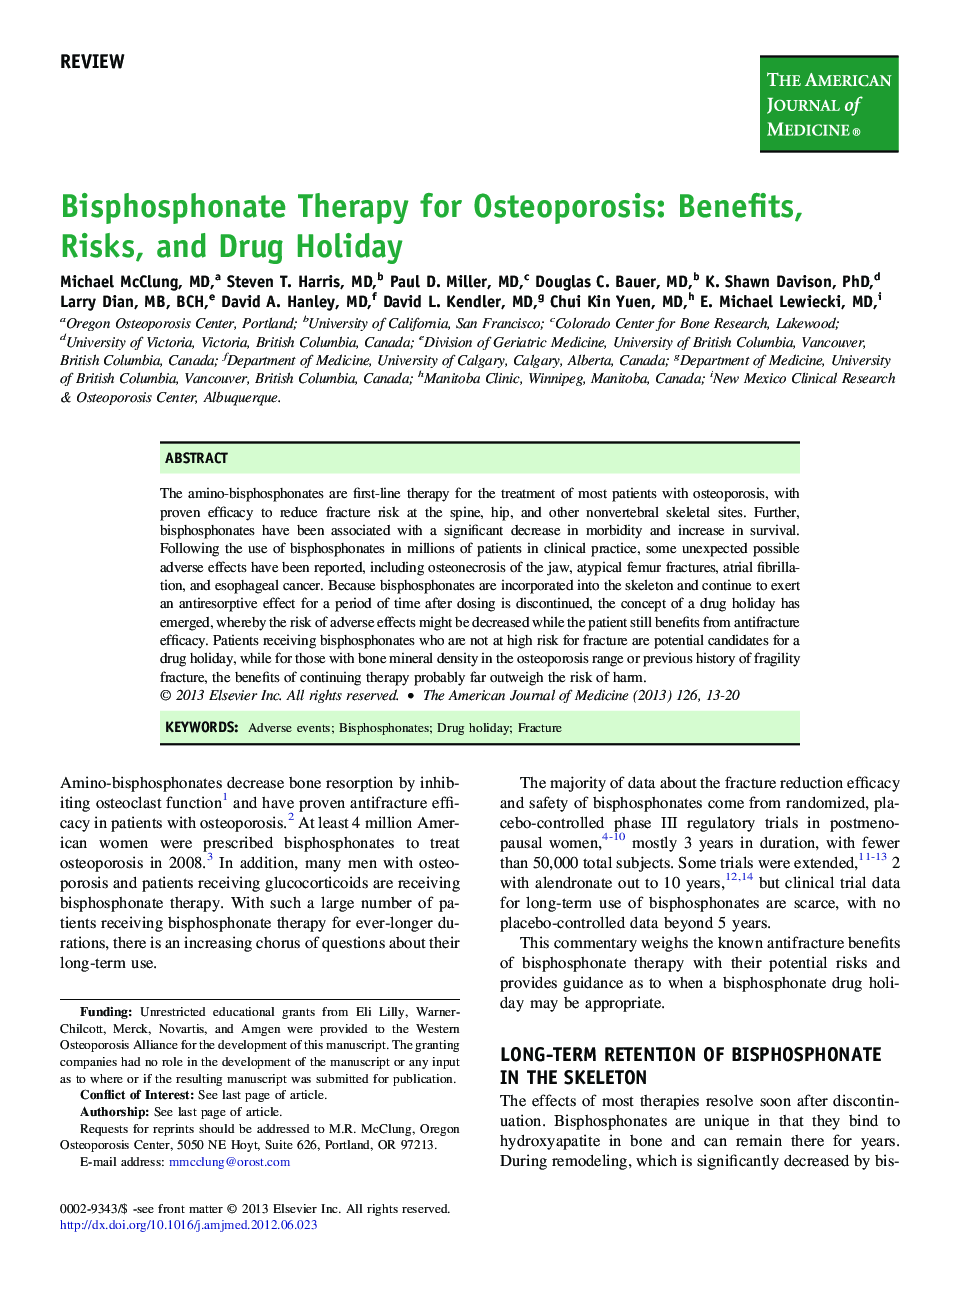 Bisphosphonate Therapy for Osteoporosis: Benefits, Risks, and Drug Holiday 